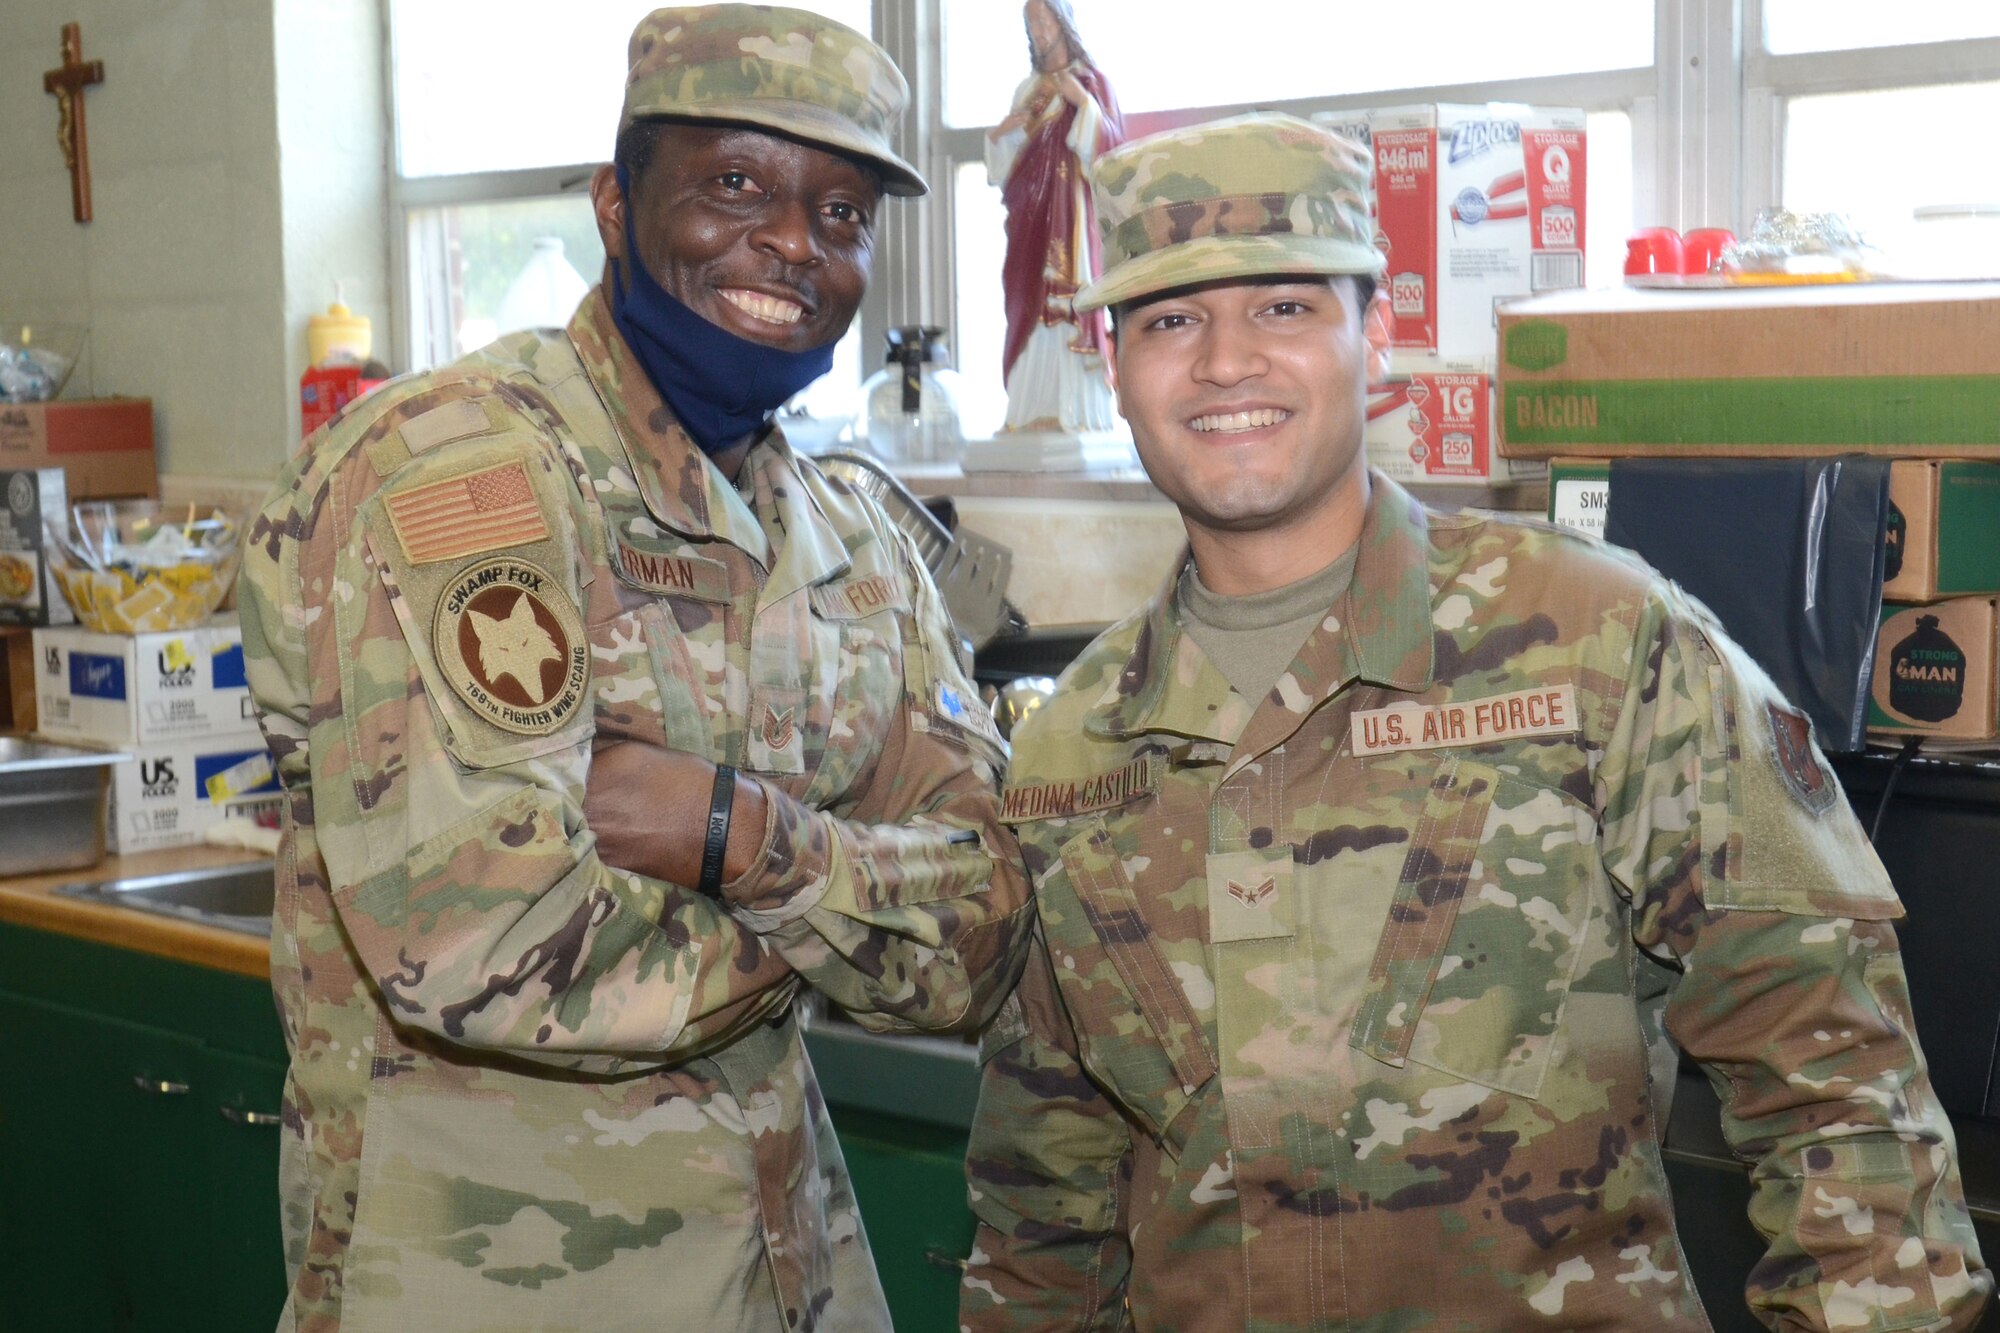 U.S. Air Force Tech. Sgt. Reggie German (left) and Airman Fernando Medina-Castillo, assigned to the 169th Fighter Wing, McEntire Joint National Guard Base, South Carolina, support Operation Healthy Delta, a Department of Defense sponsored Innovative Readiness Training program designed to provide military training opportunities by providing key services to local citizens. German and Medina-Castillo are serving at Sacred Heart Church in Caruthersville, Missouri June 17, 2021 (U.S. Air National Guard photo by Lt. Col. Jim St.Clair, 169th Fighter Wing Public Affairs)